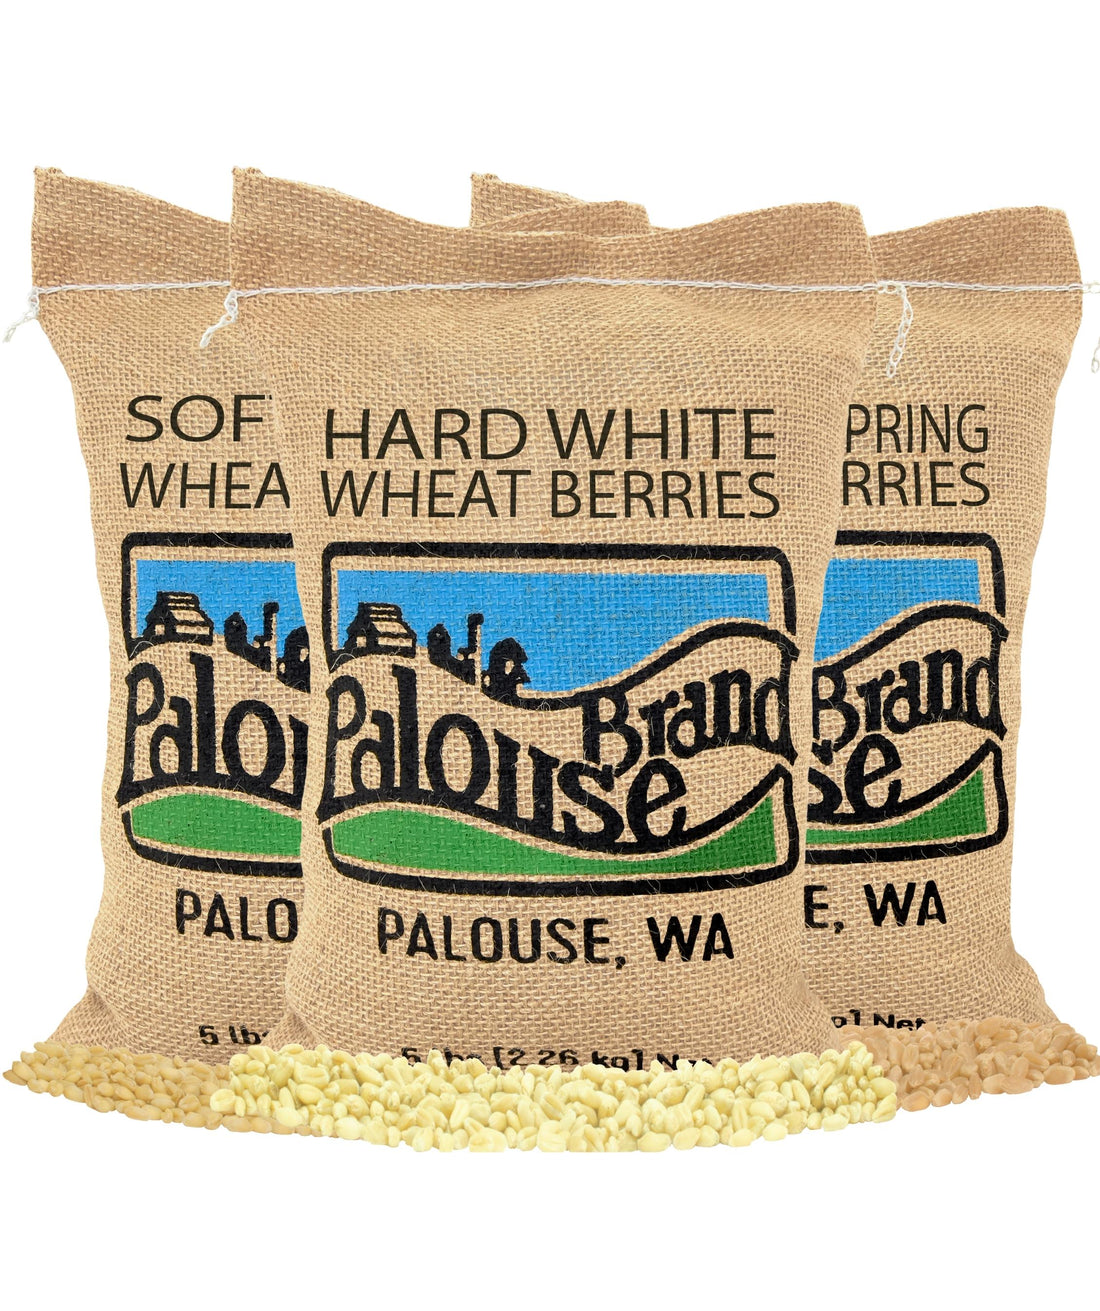 Wheat Bundle | 15 LBS: Hard White, Soft White and Hard Red Spring Wheat Berries